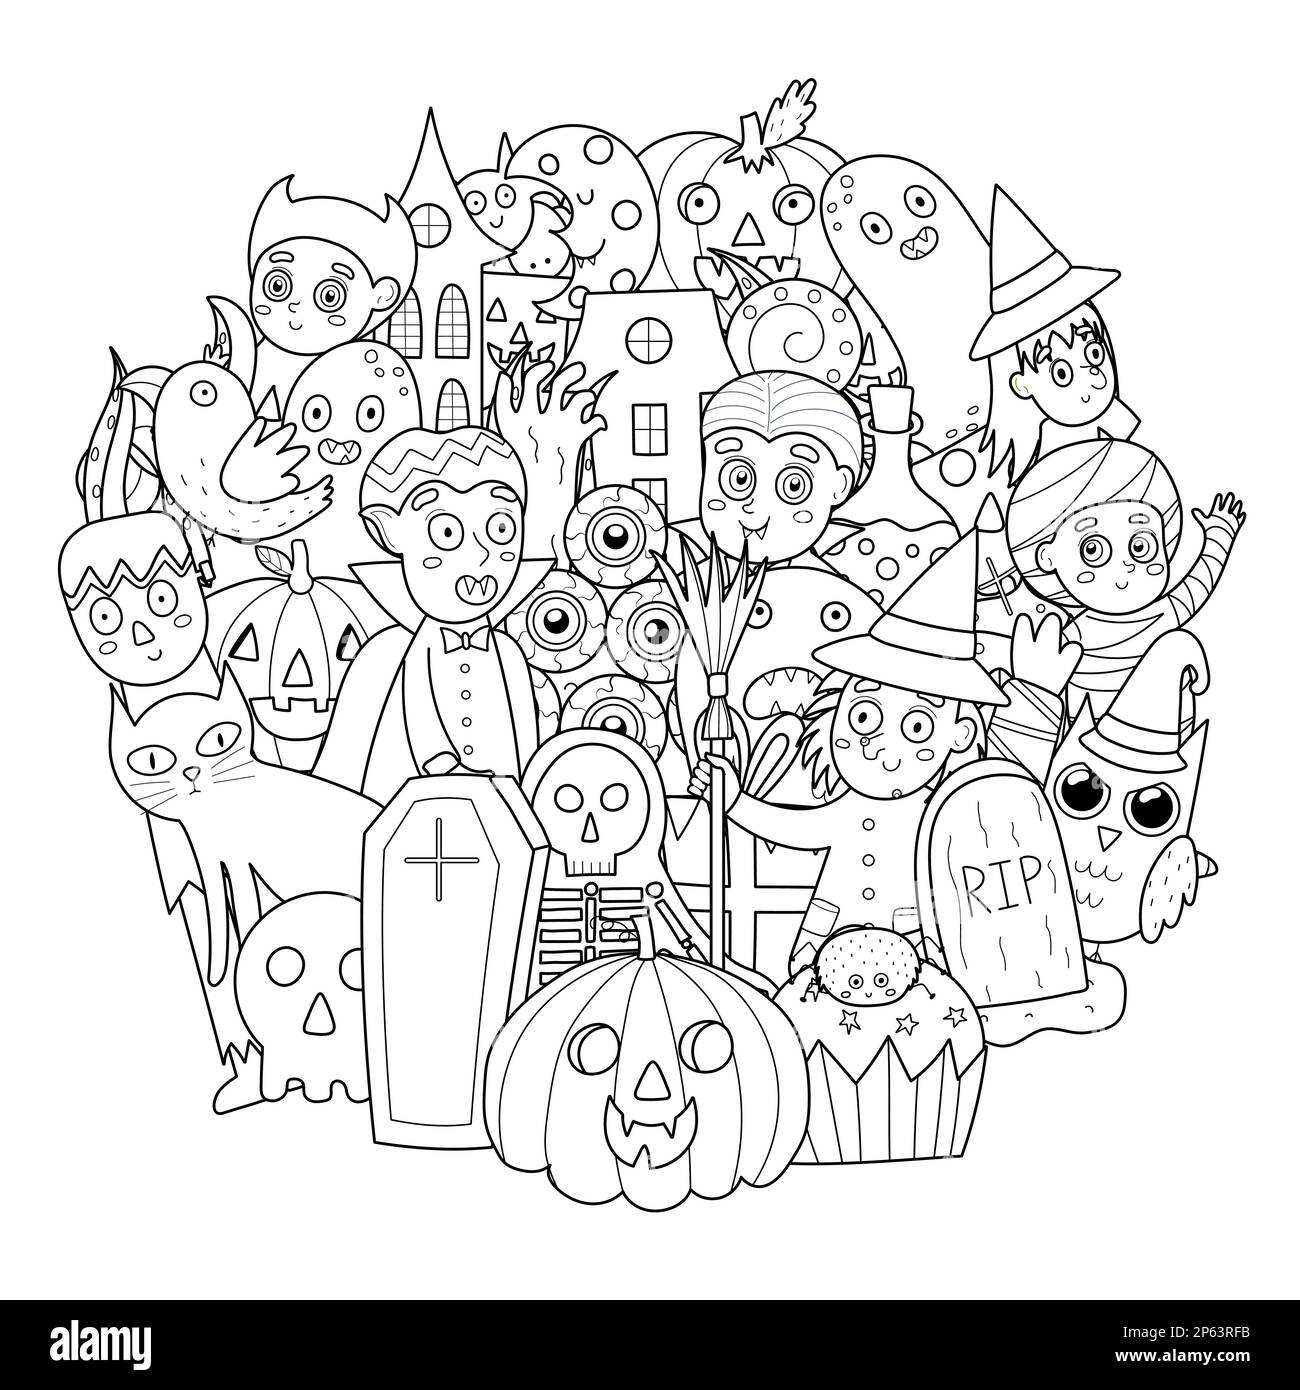 Doodle halloween characters coloring page spooky circle shape print halloween black and white mandala stock vector image art